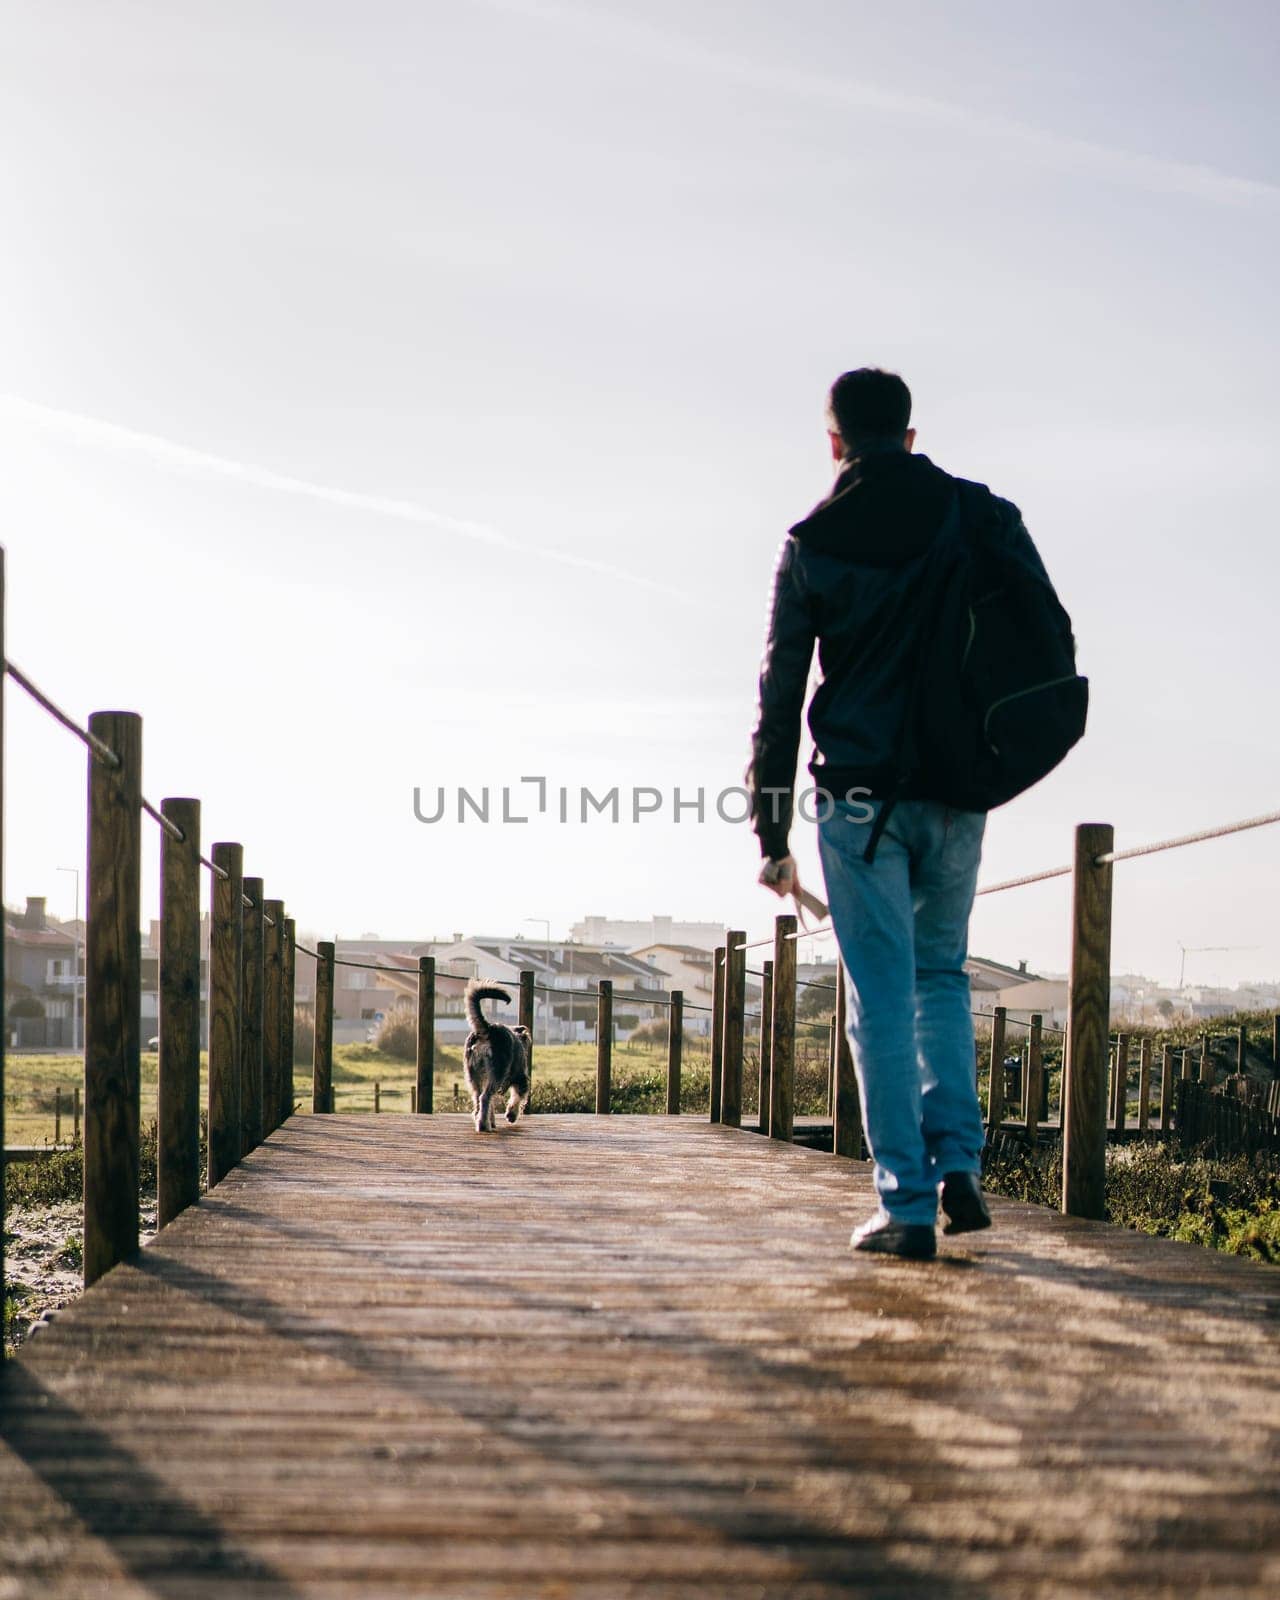 Low angle view of man with backpack on morning walk with his dog through a wooden path.